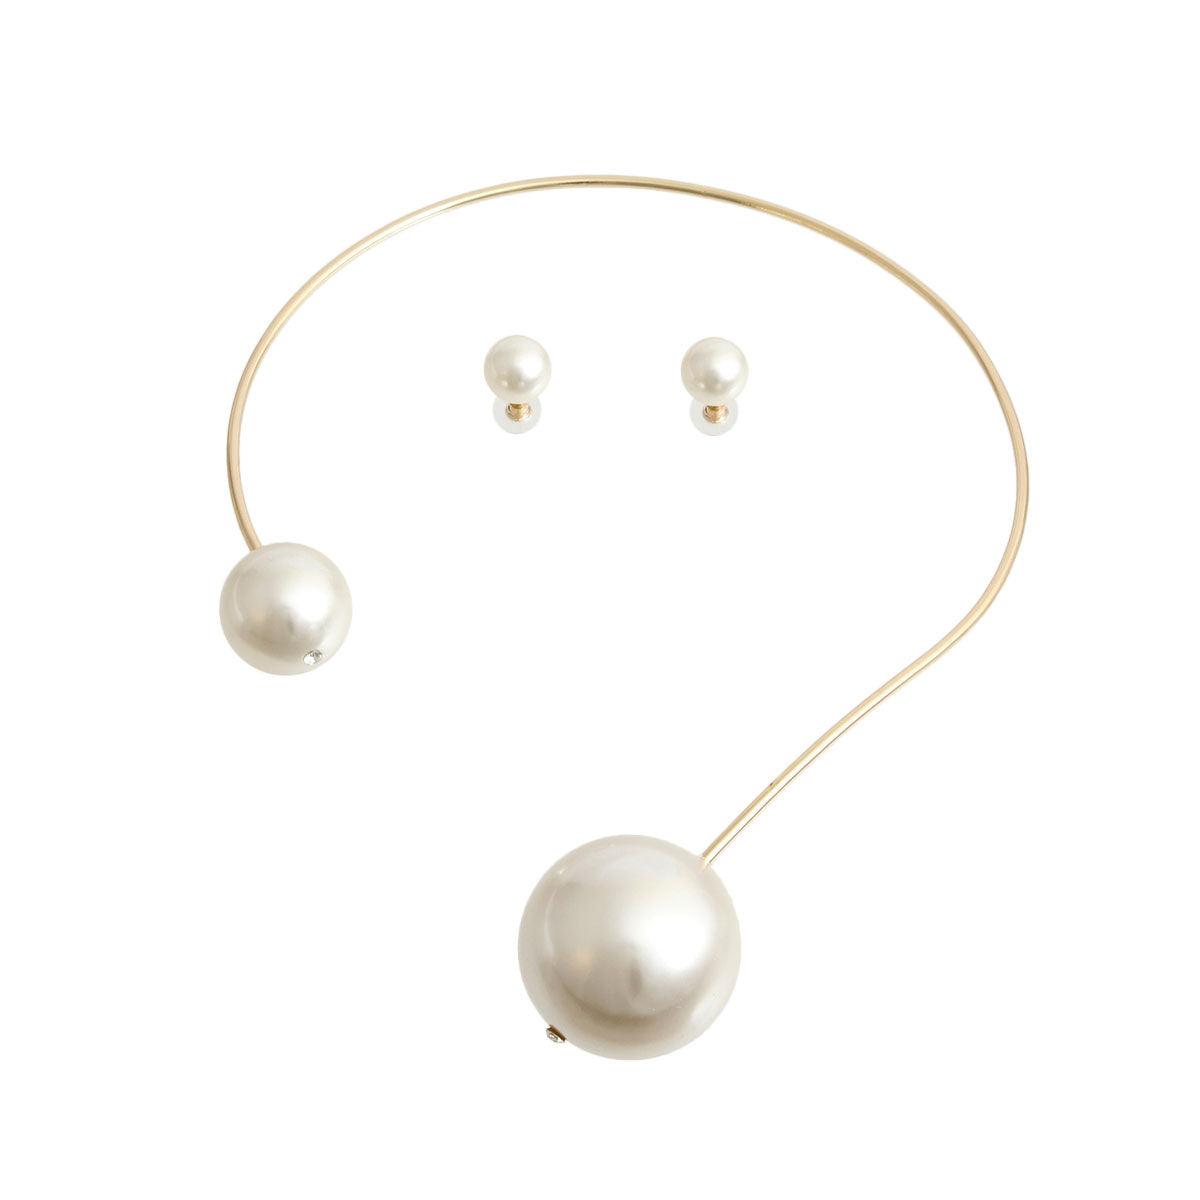 Exquisite Cream Pearl Bauble Gold Choker Necklace Set | Fashion Jewelry